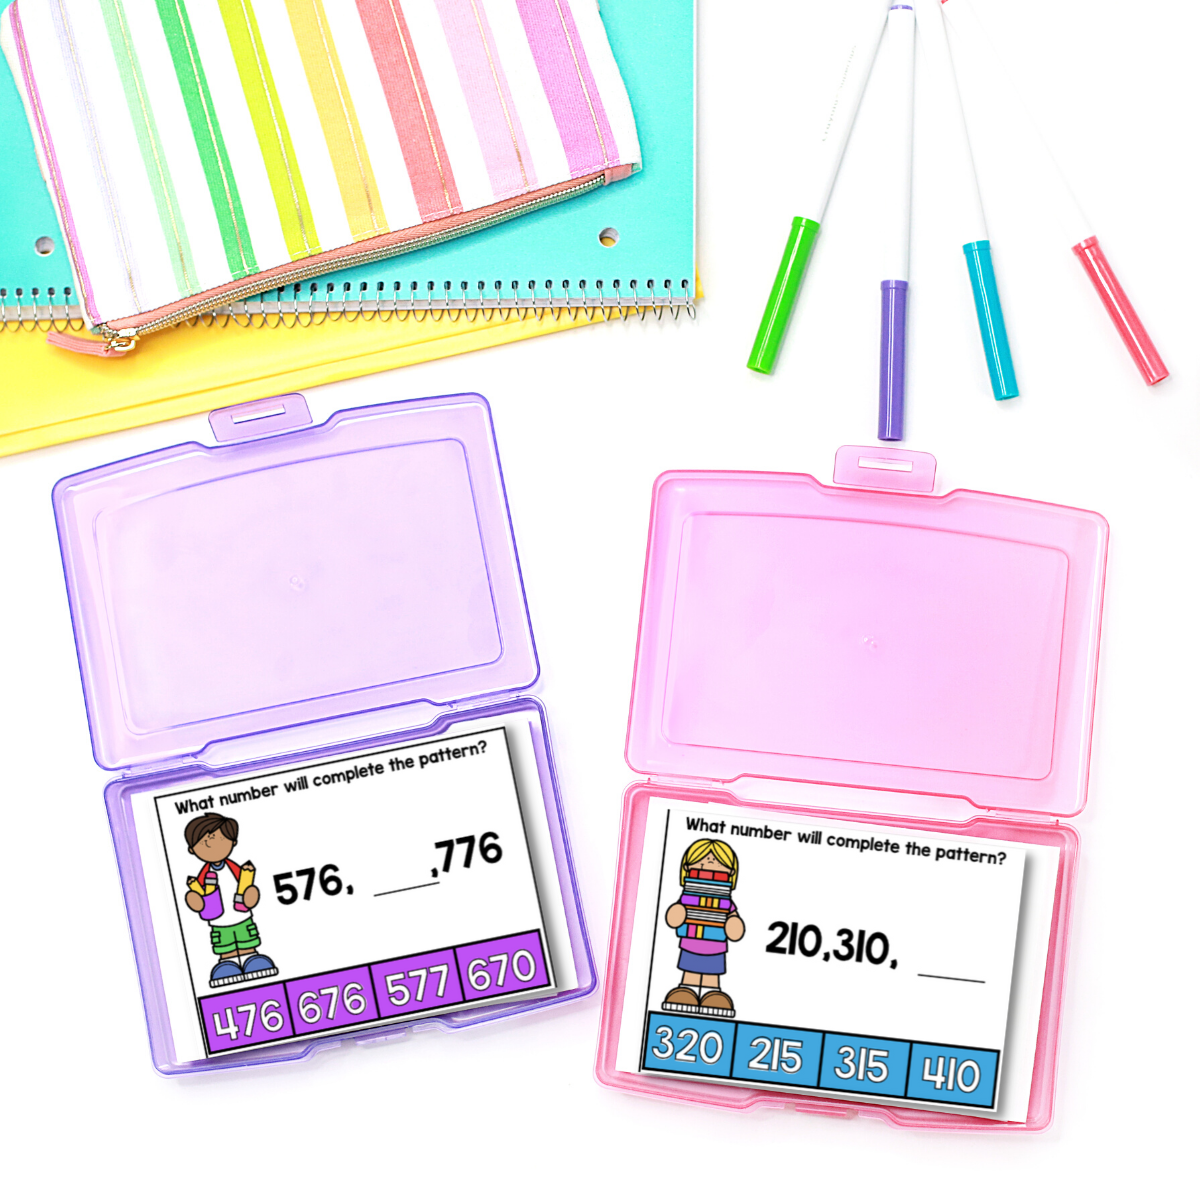 skip-counting-worksheets-for-grade-2 